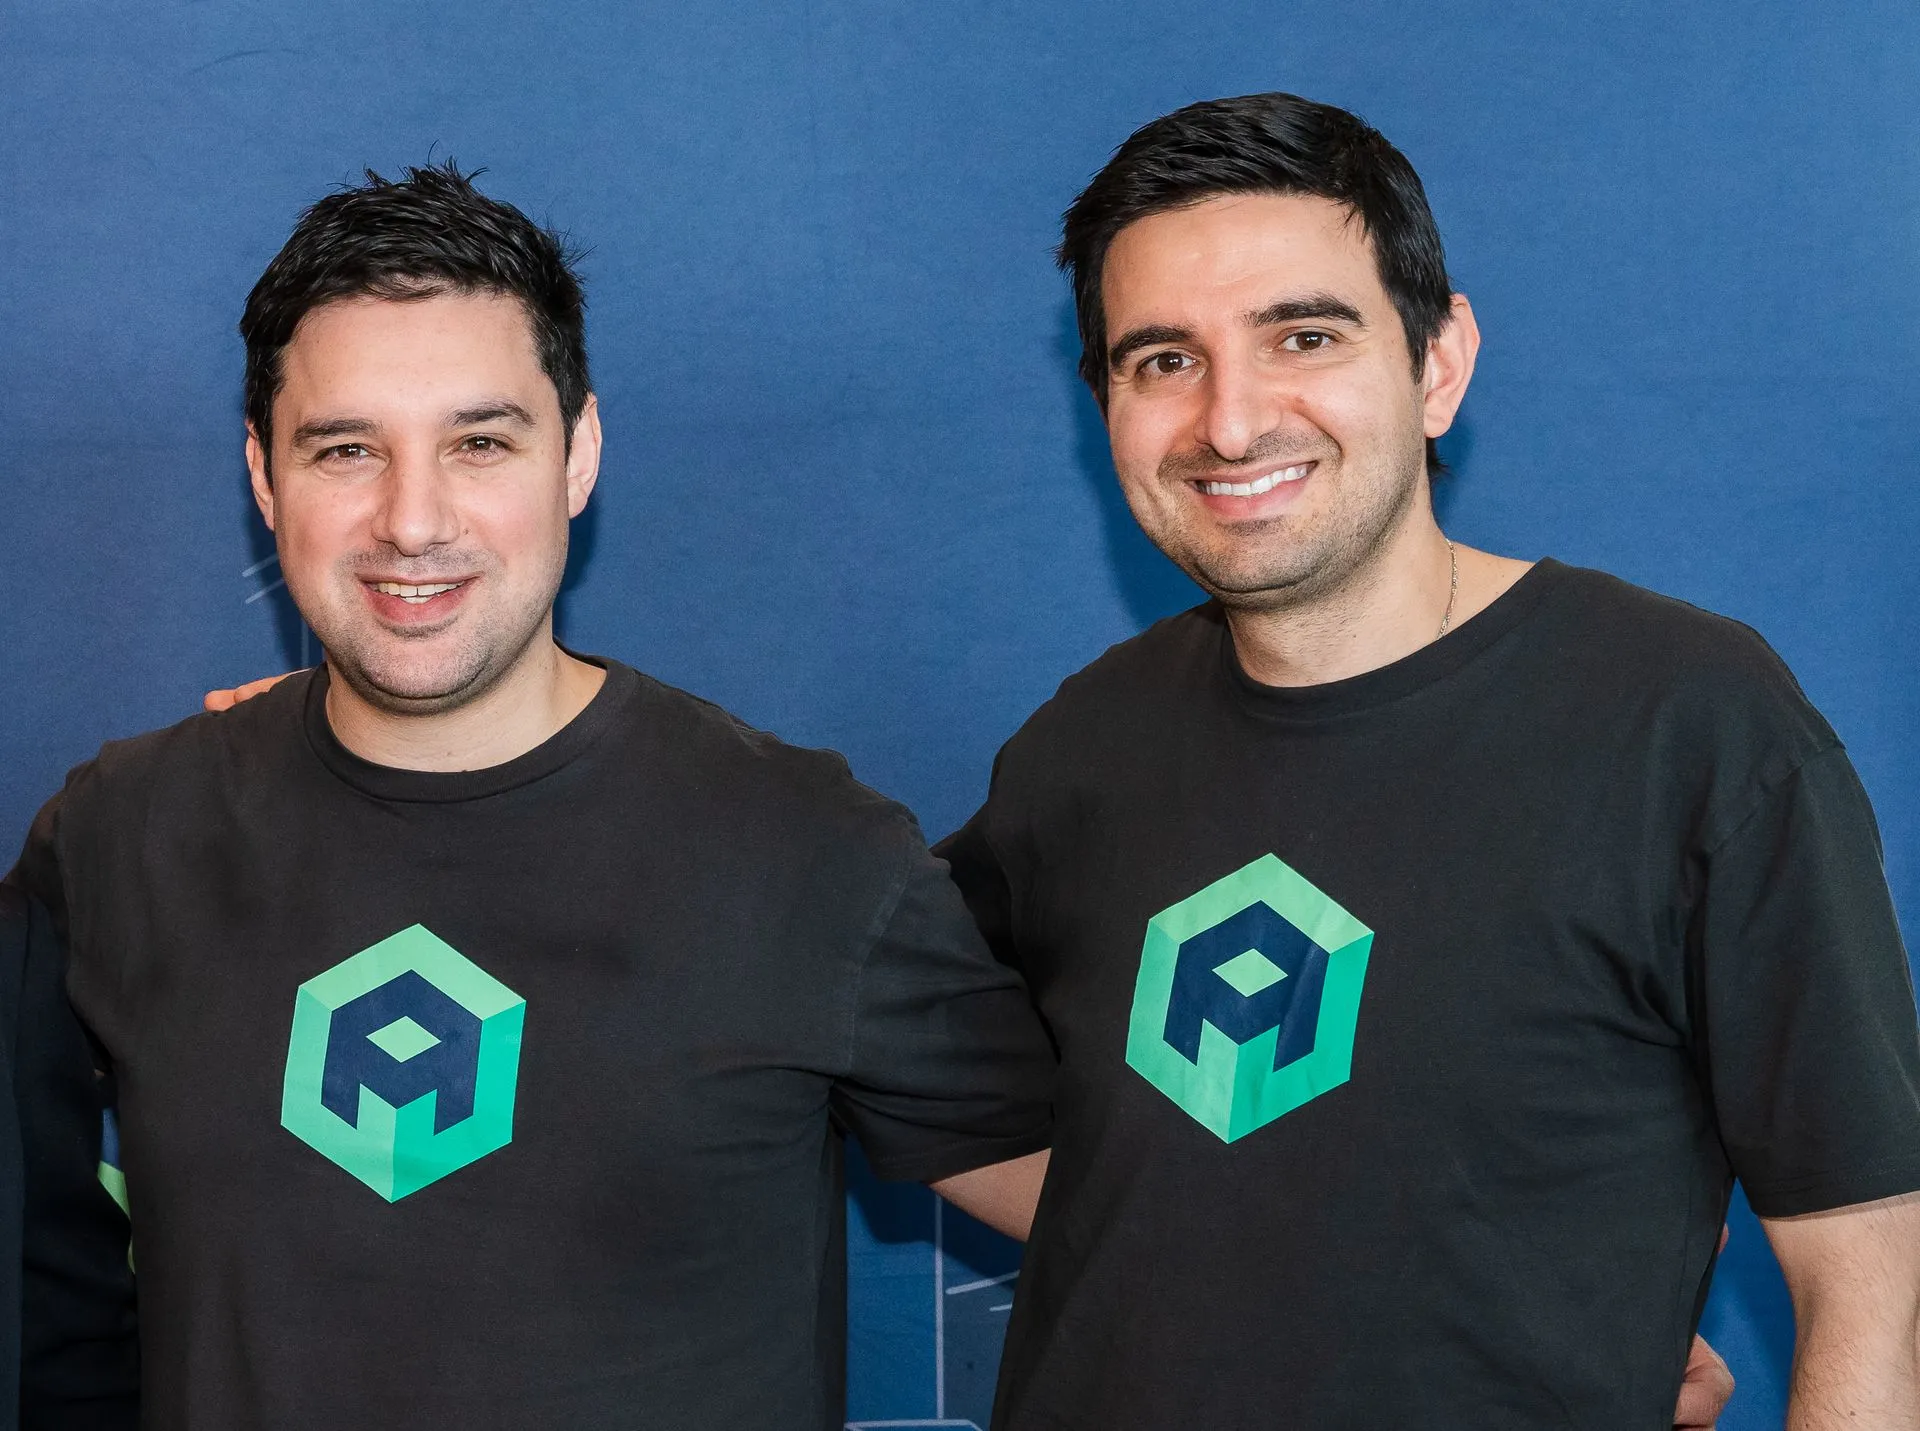 Archistar’s Founders Ranked #29 in Australia’s Top 100 Young Entrepreneurs 2023